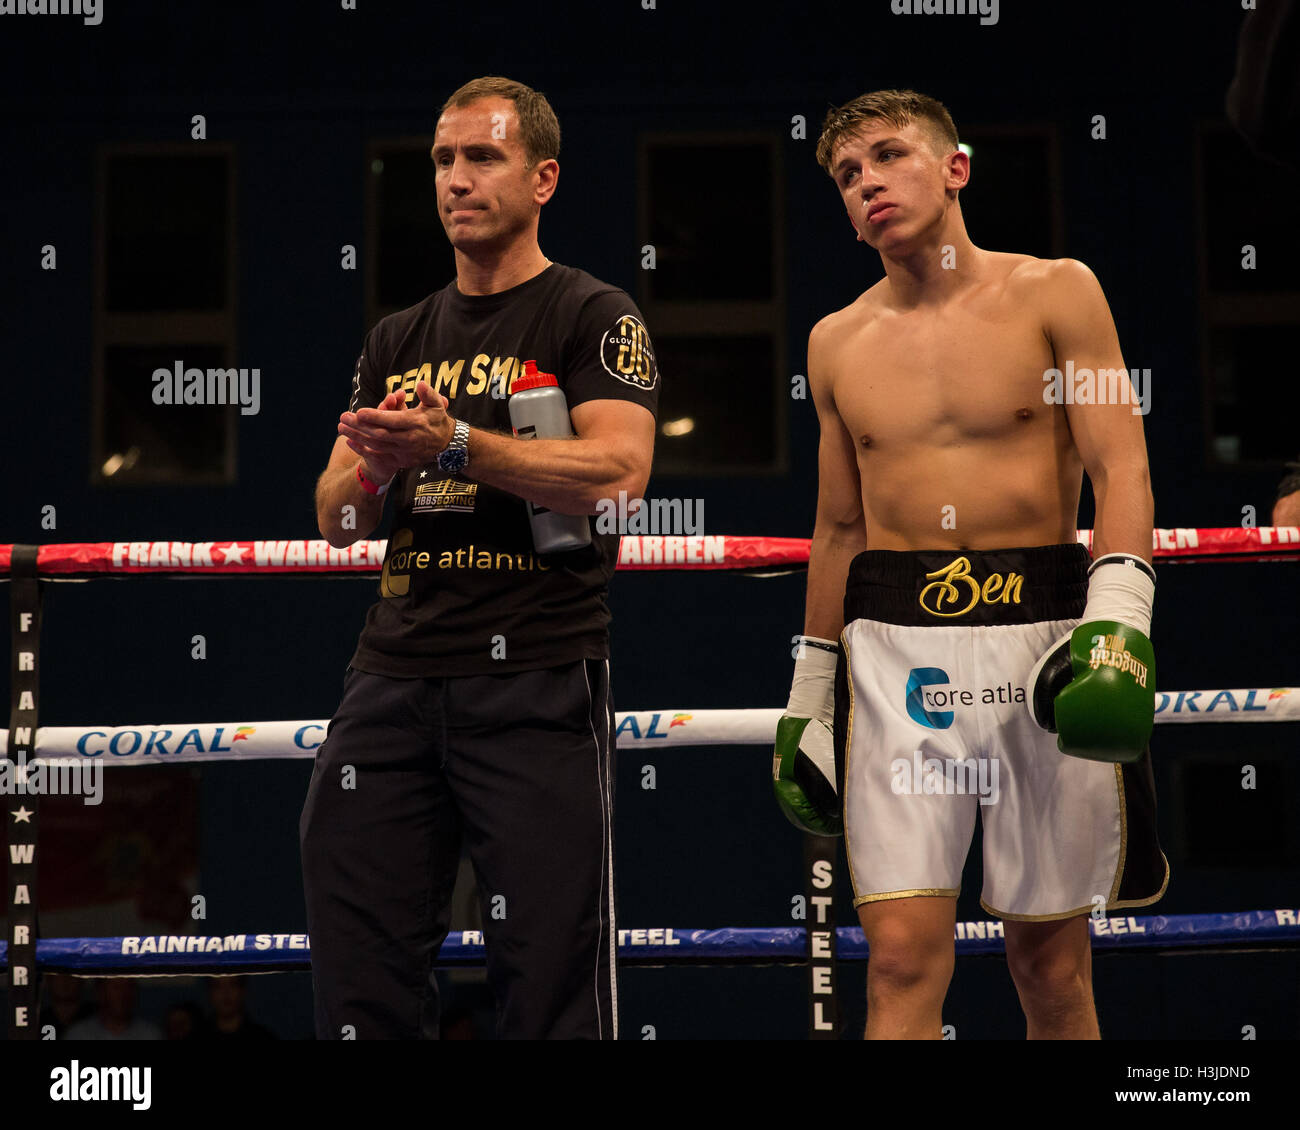 Ben Smith and Mark Tibbs before a boxing bout Stock Photo